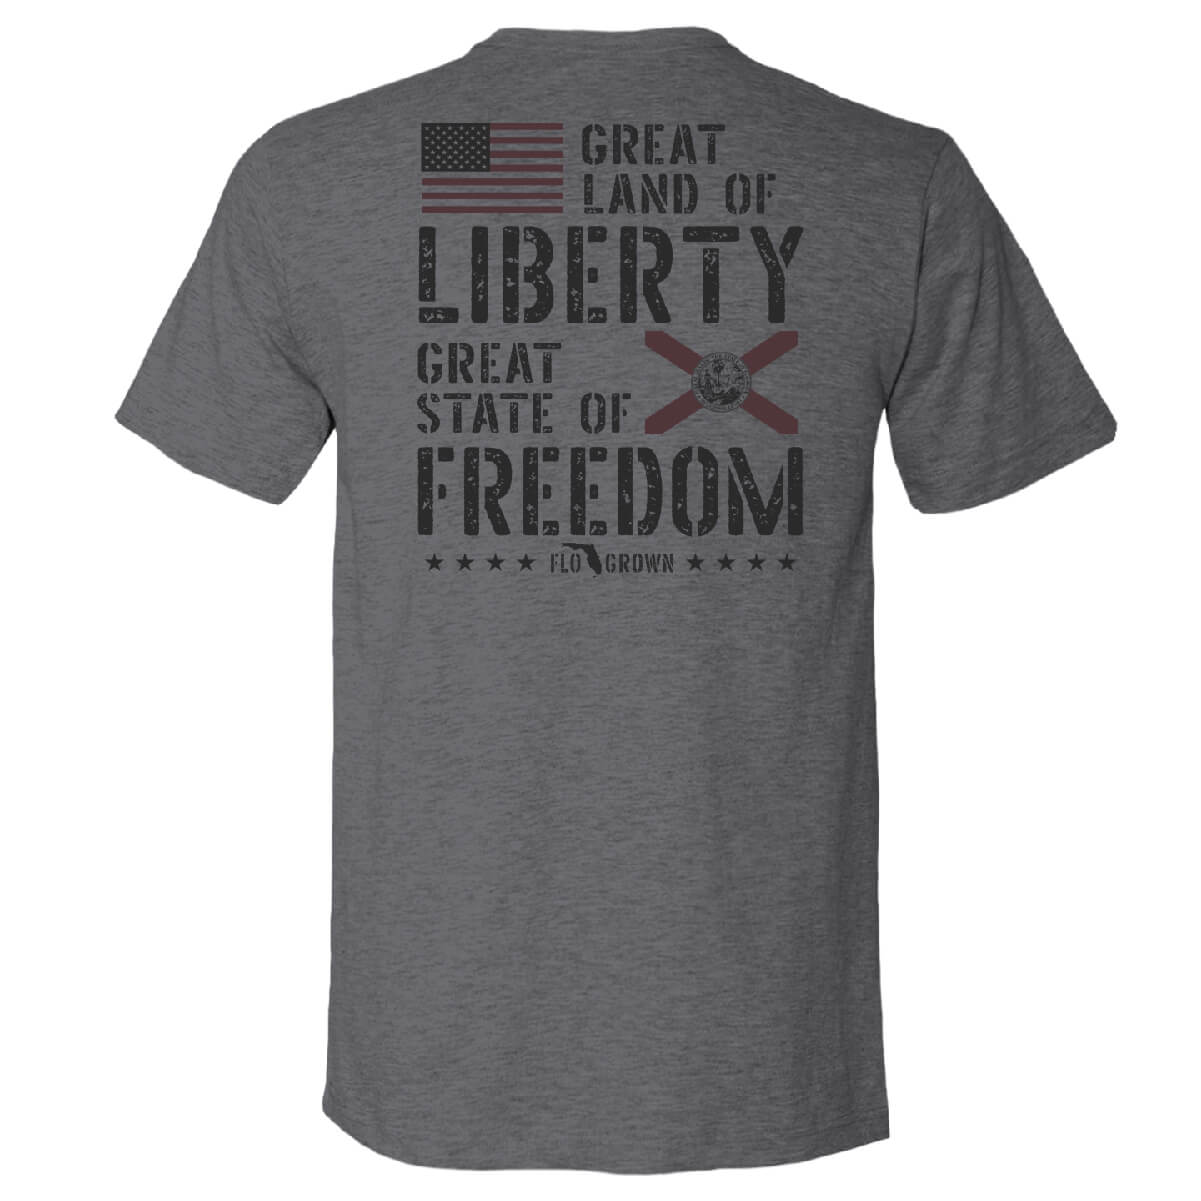 State of Freedom Tee